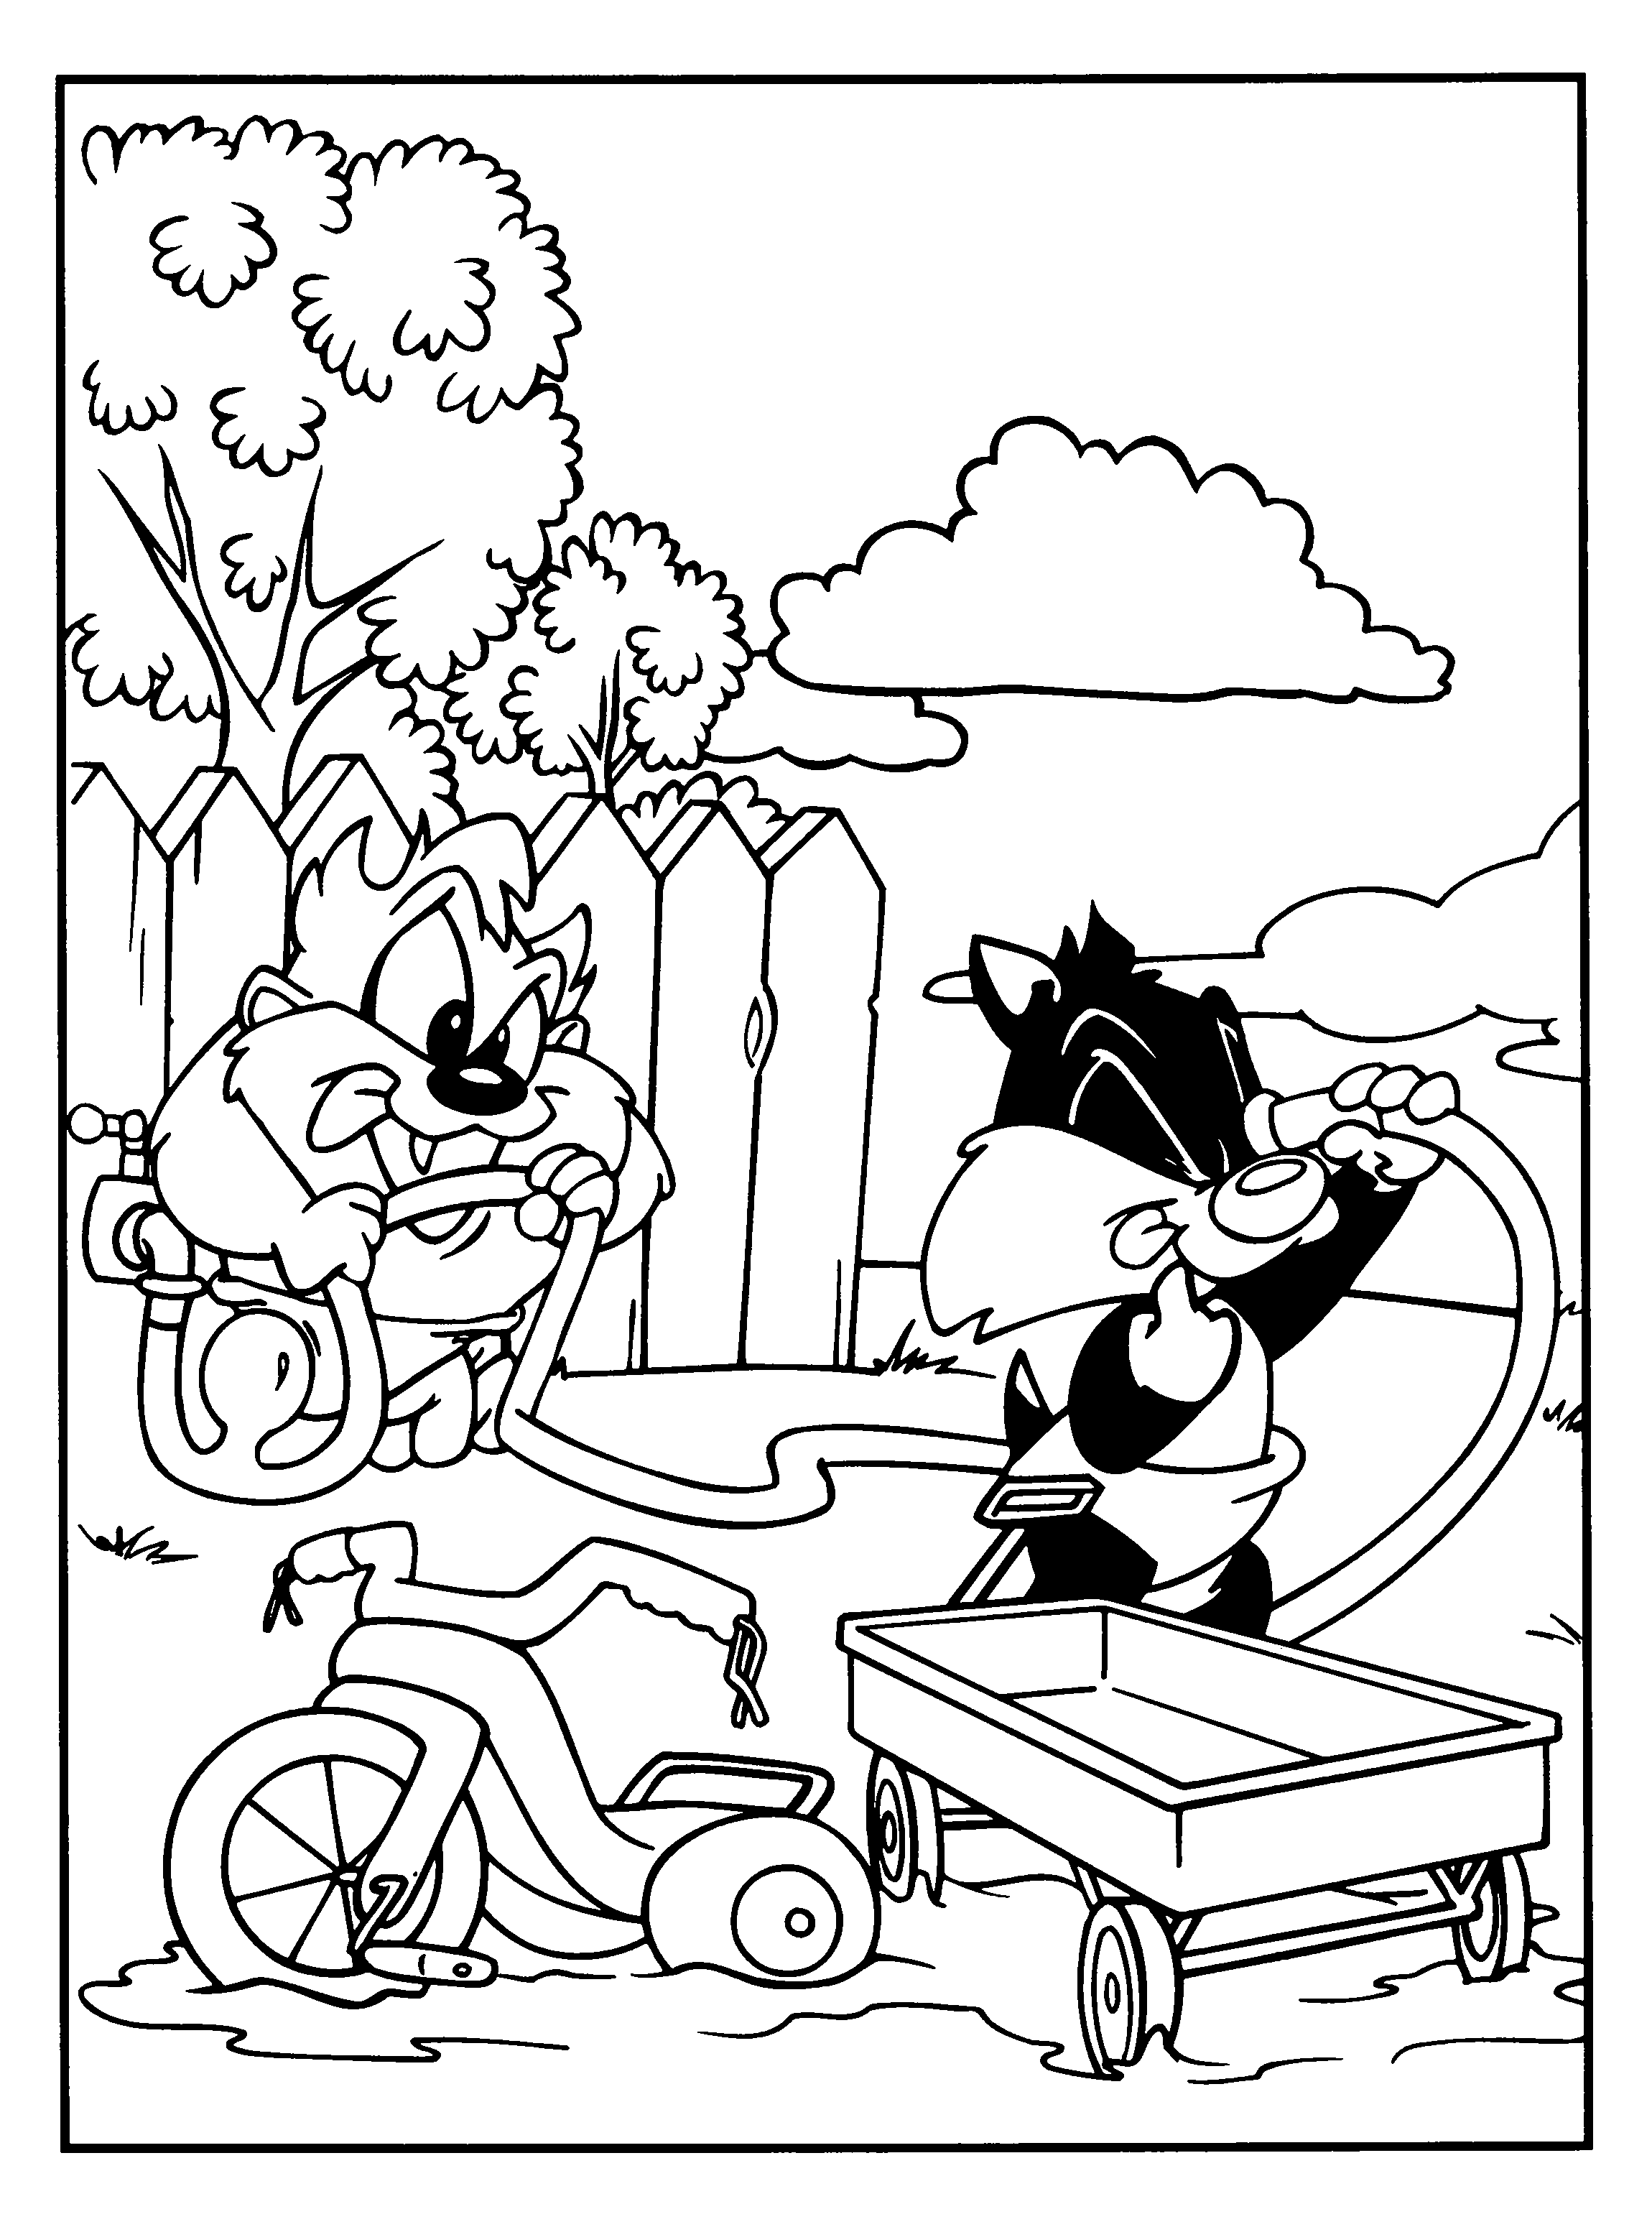 Baby Disney Cartoons Coloring Pages | Coloring Pages - Part 3